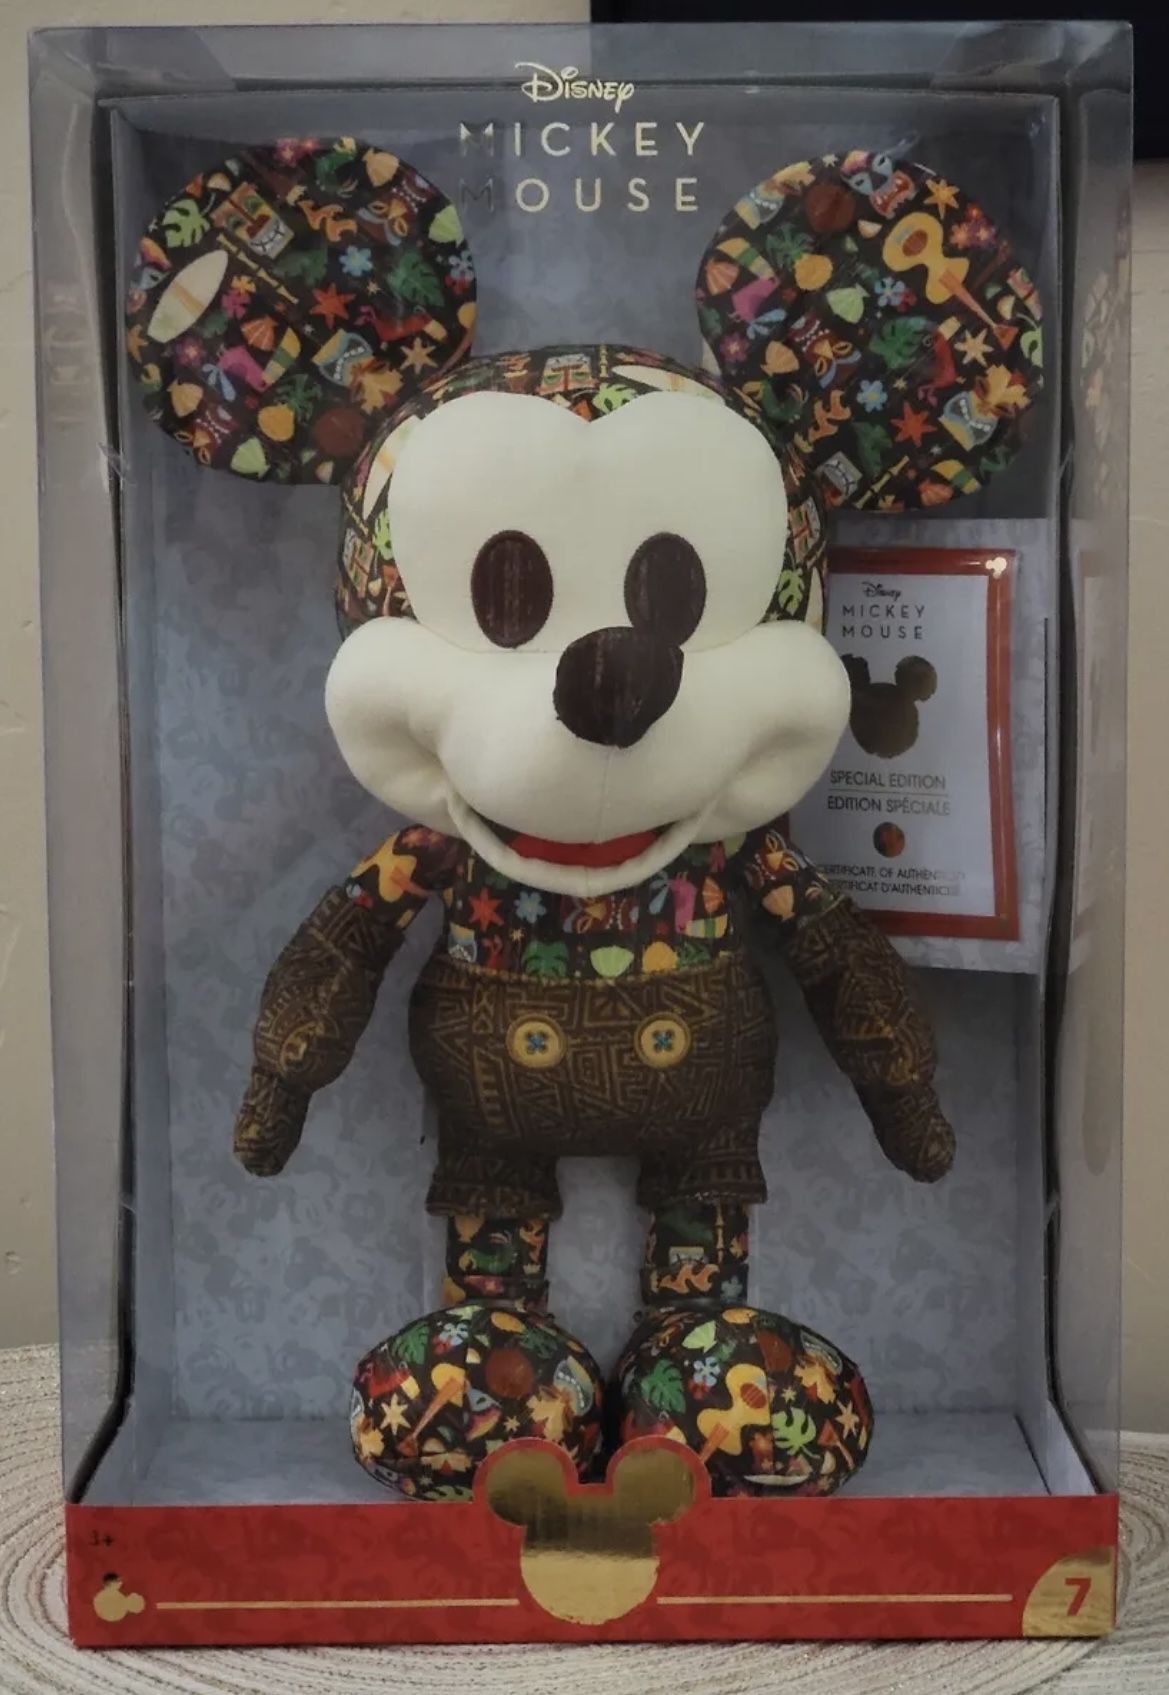 Tiki Mickey Mouse 16” Plush *BRAND NEW MINT* Amazon Exclusive Disney’s Year of the Mouse July Collector